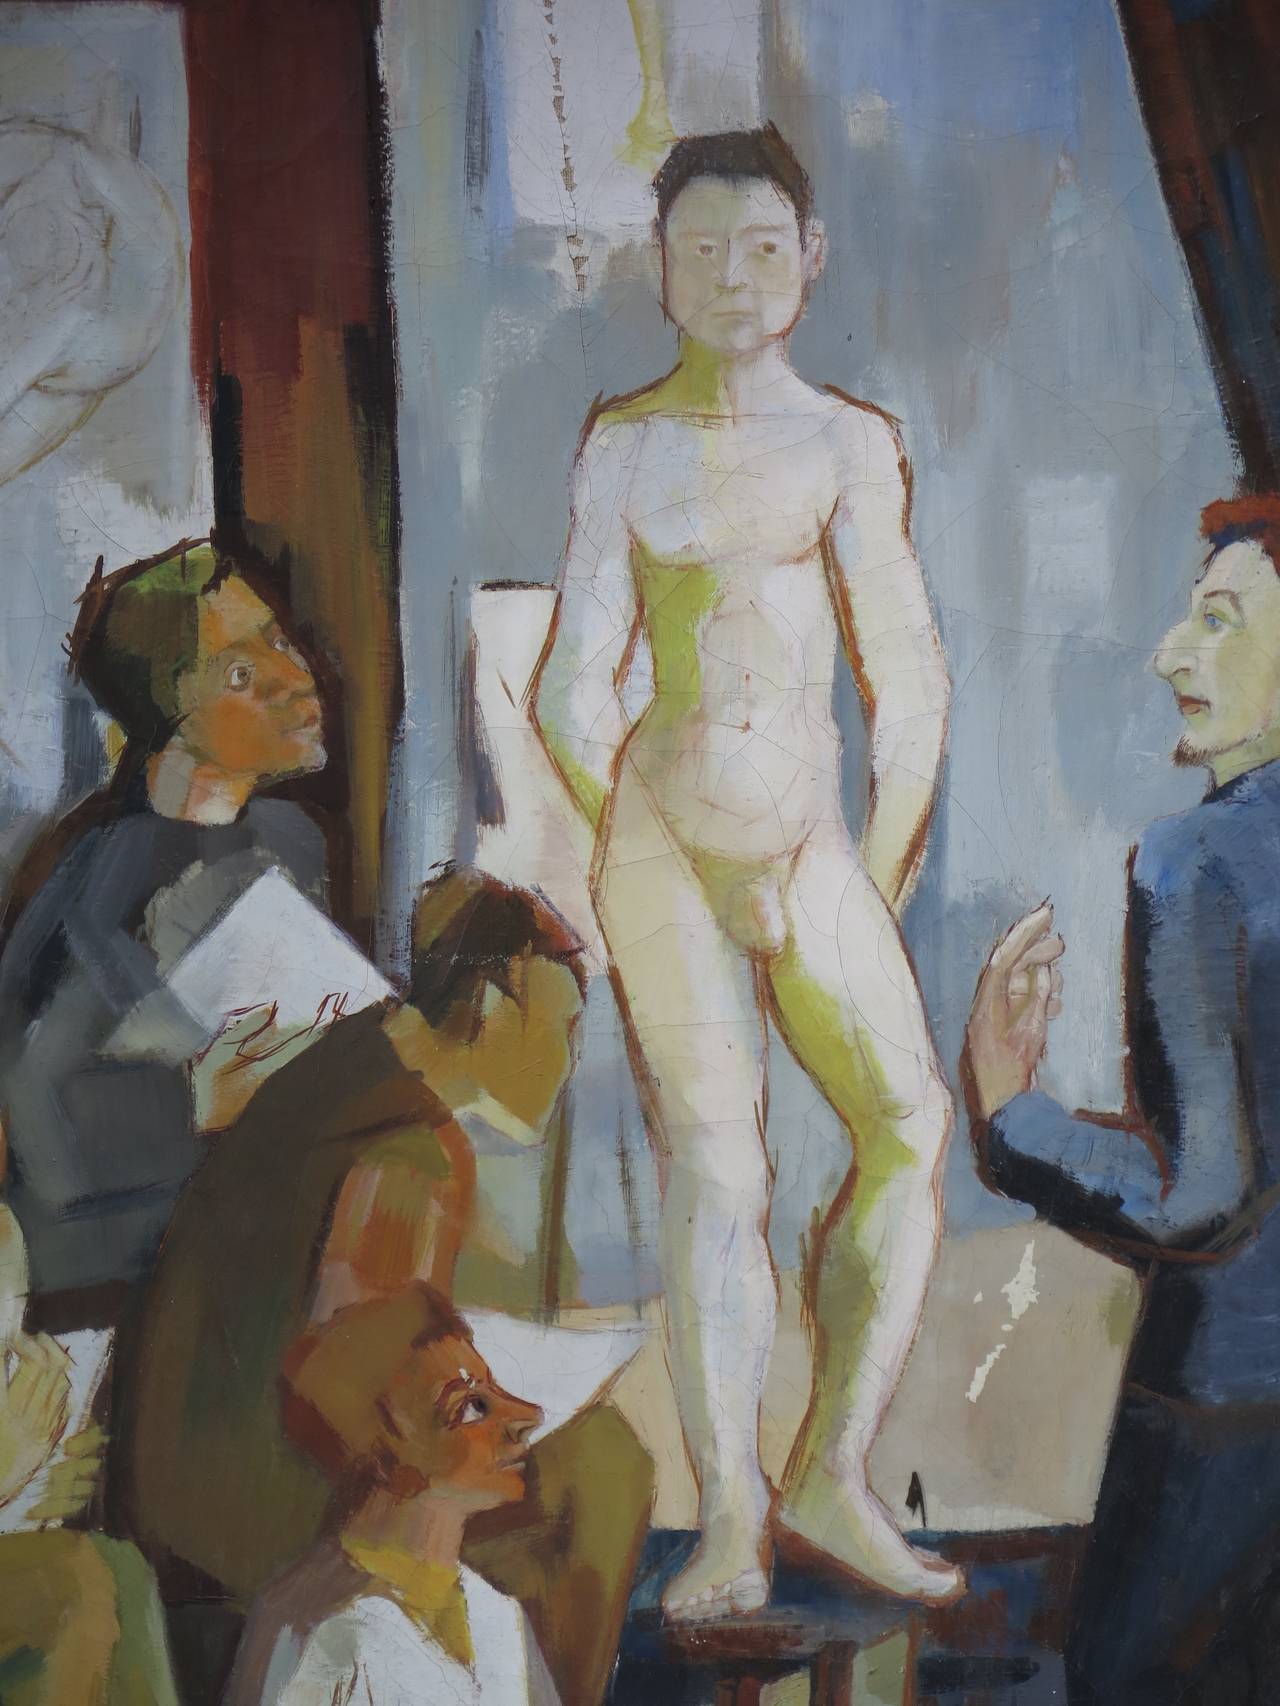 Painting representing a life drawing class.